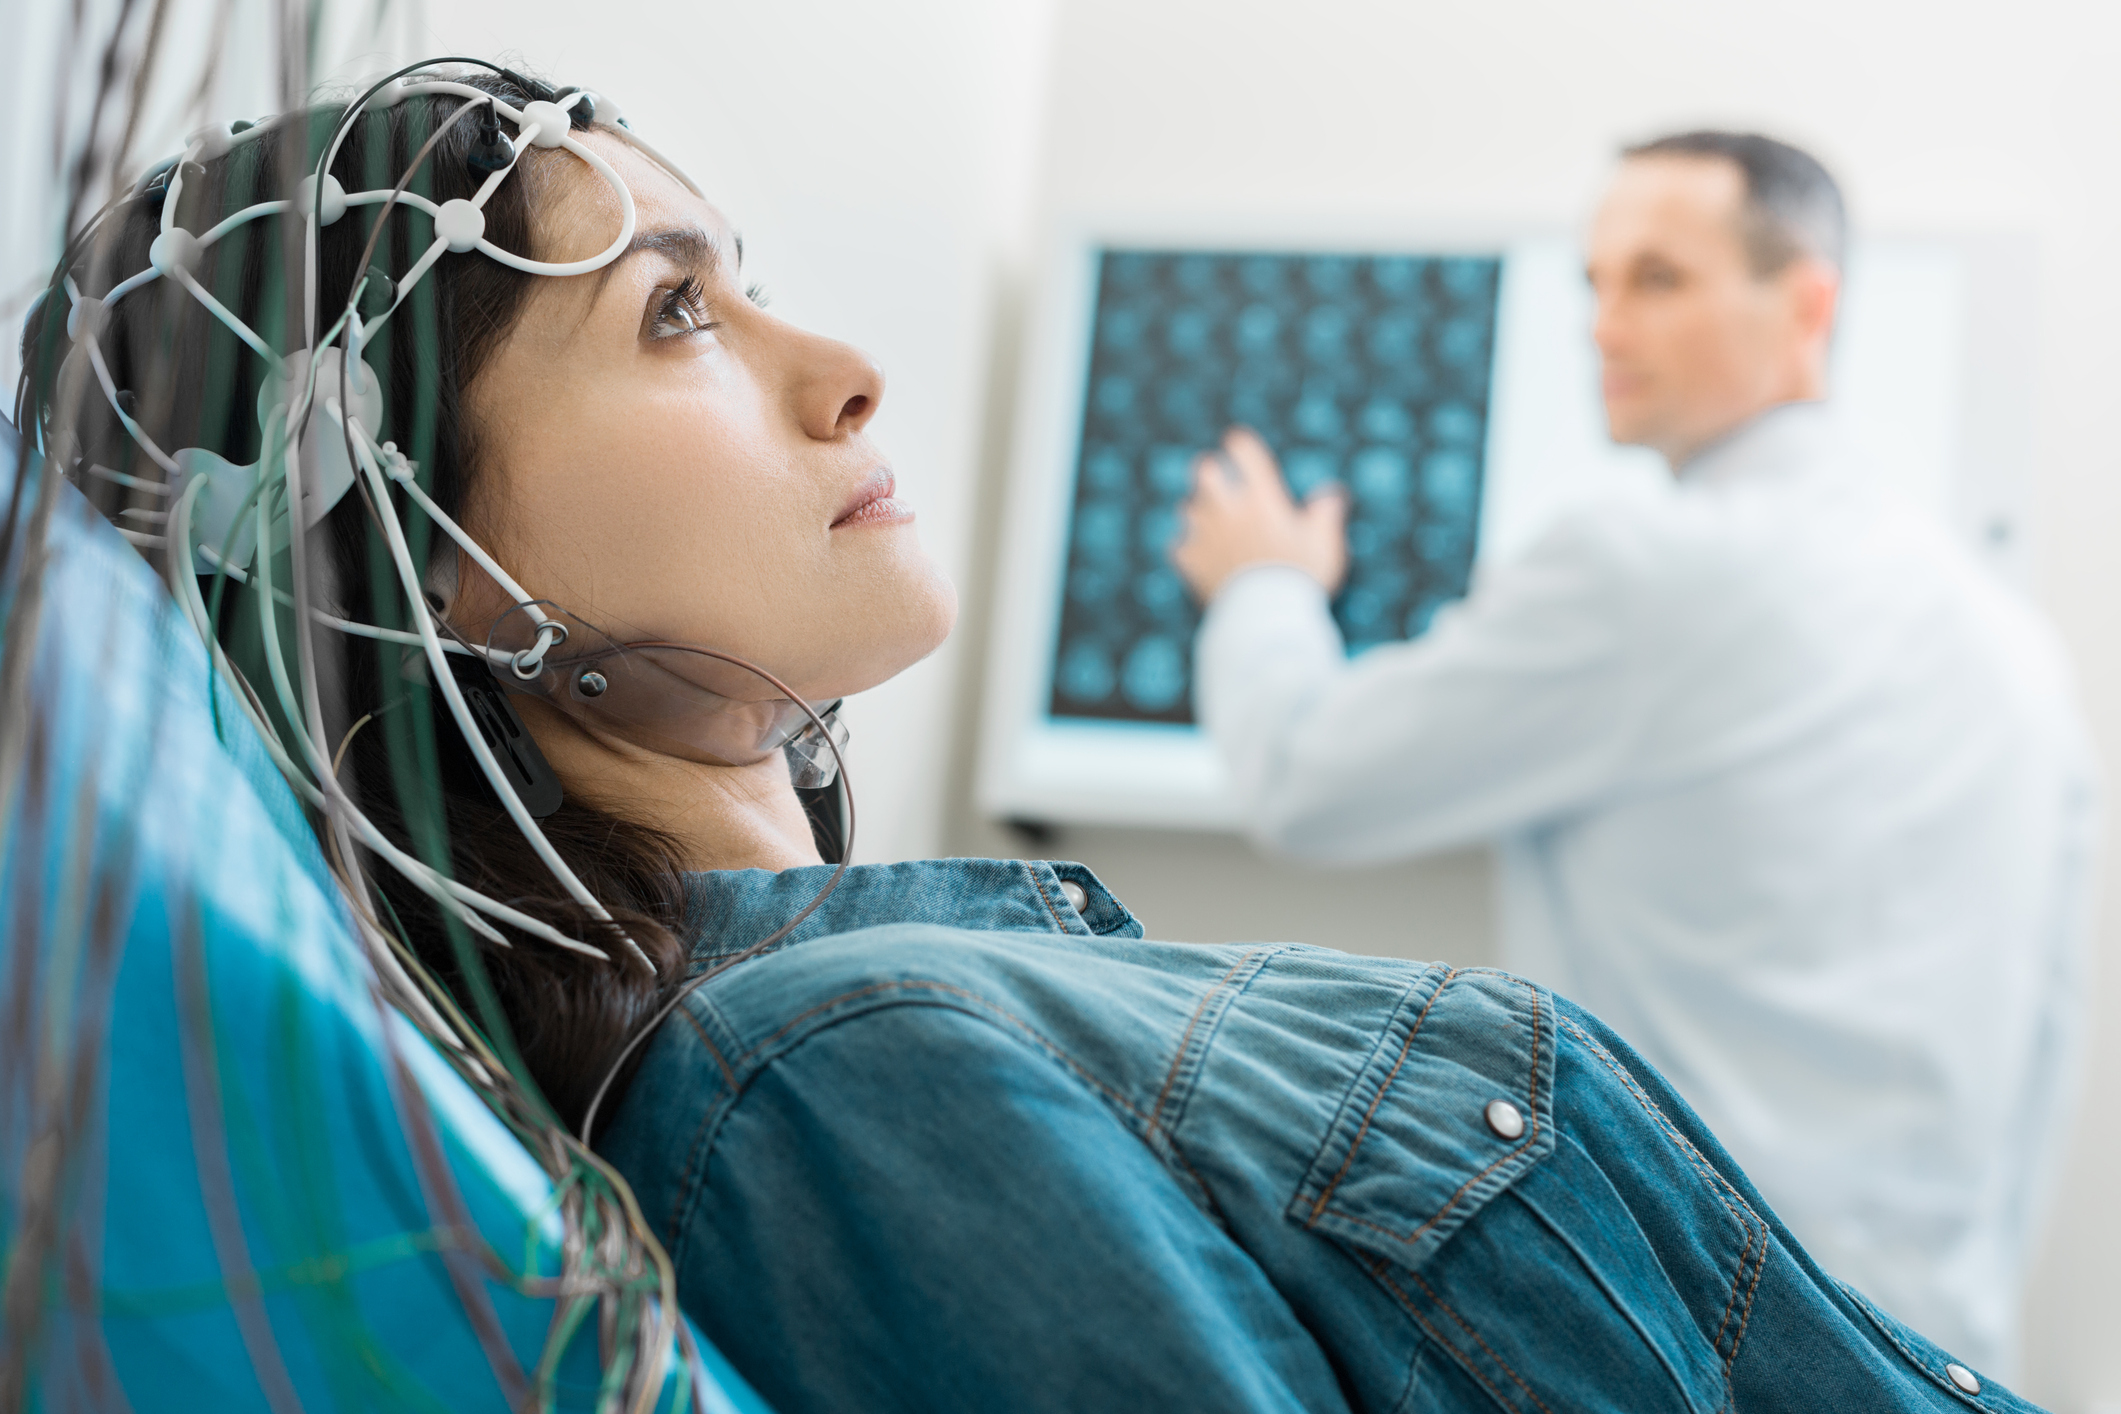 Identifying Patients with Epilepsy before They Have Seizures